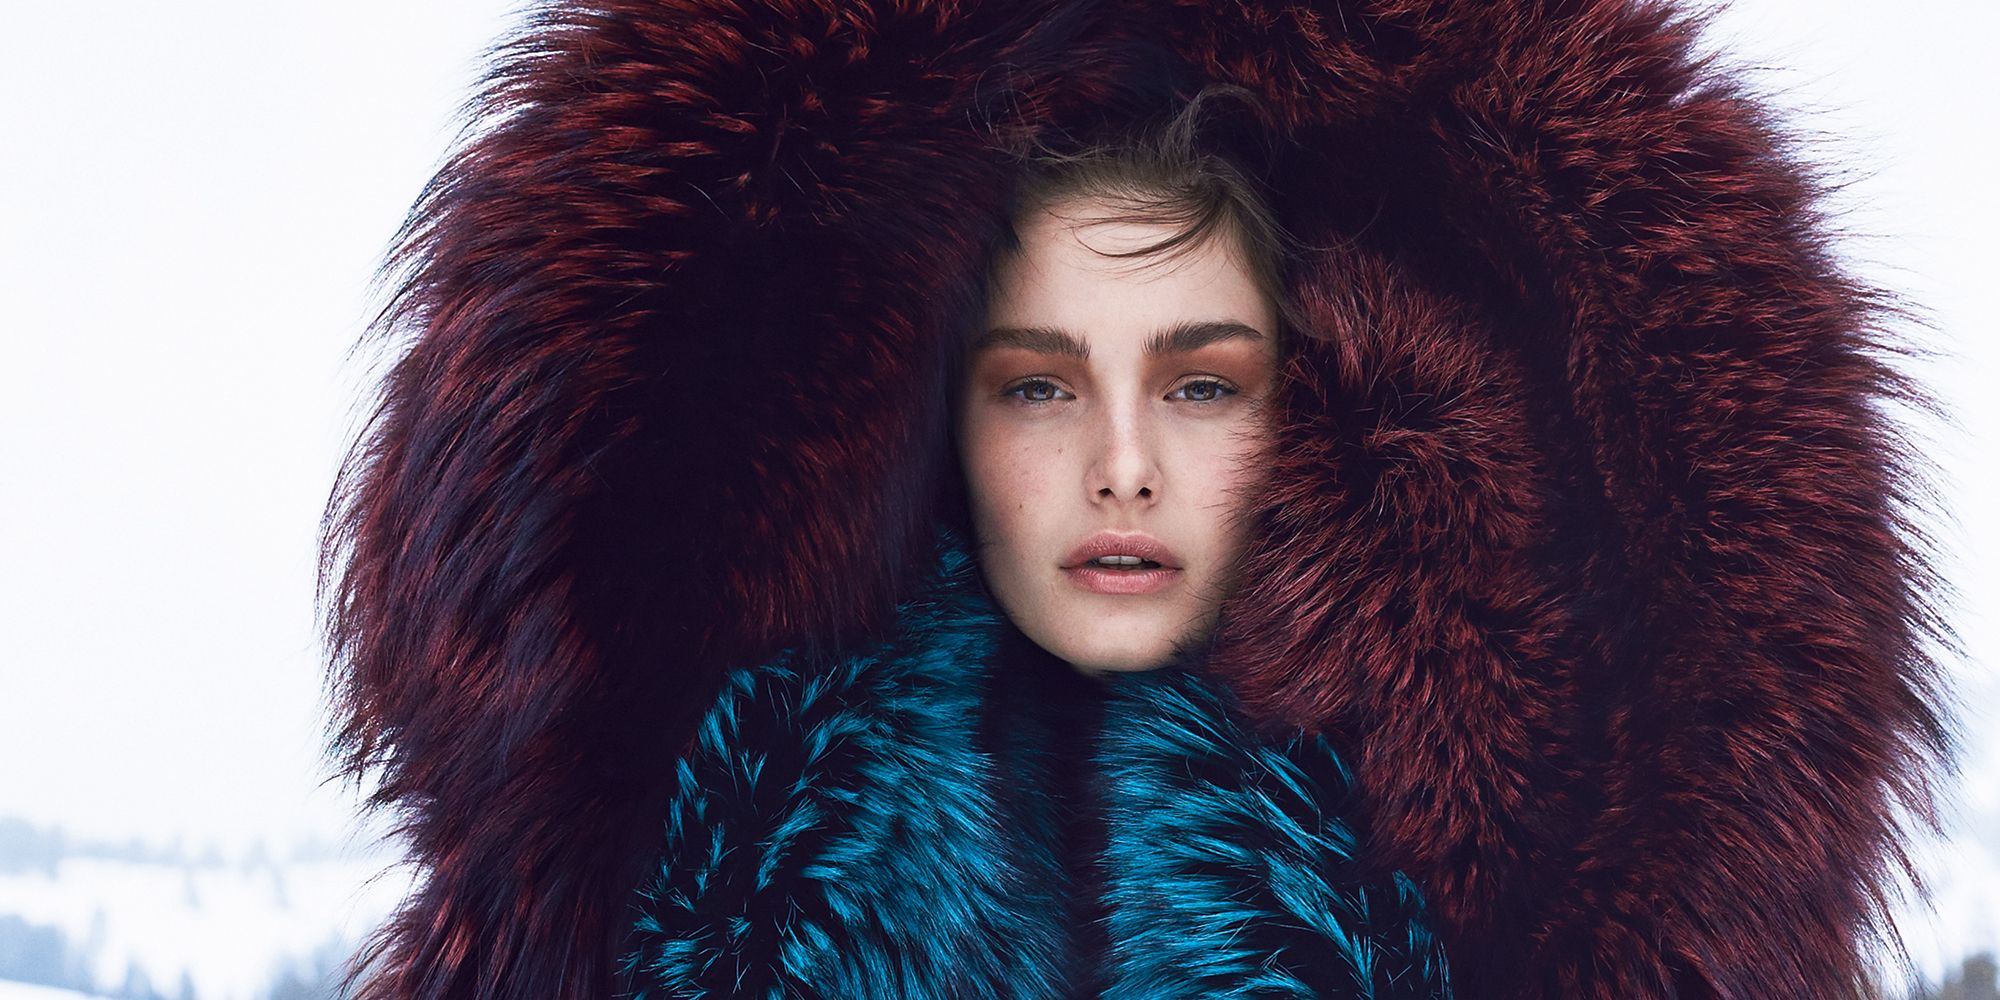 Fall And Winter Shoots In Harper S Bazaar Fall And Winter Fashion In Harper S Bazaar